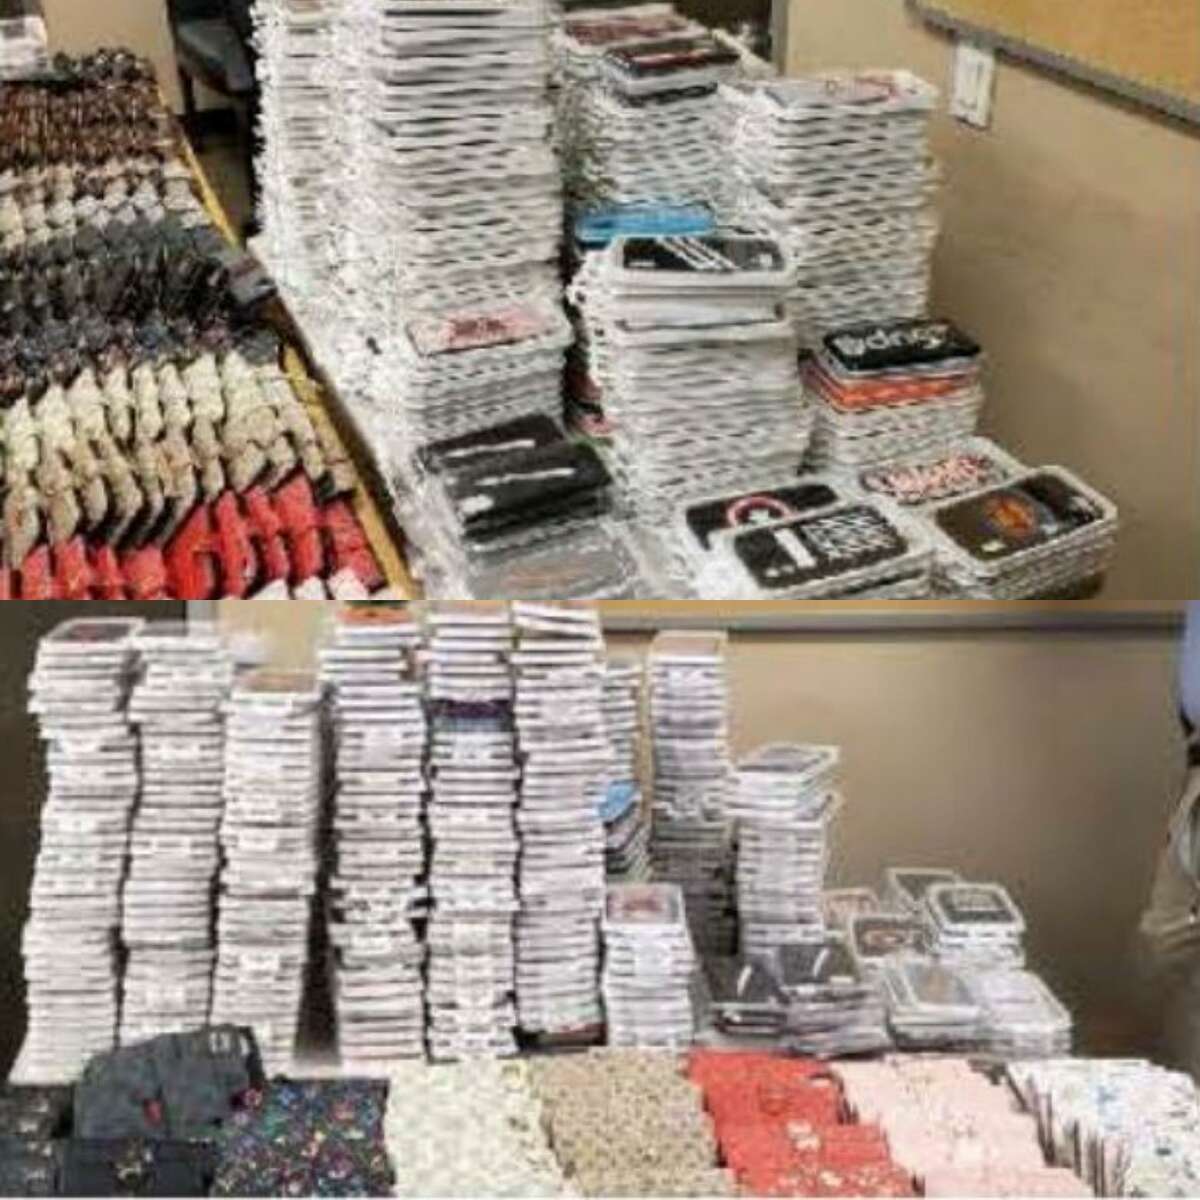 Items reportedly counterfeiting luxury brands and recently seized from The Woodlands Mall by Montgomery County Sheriff's detectives are seen stacked on tables.